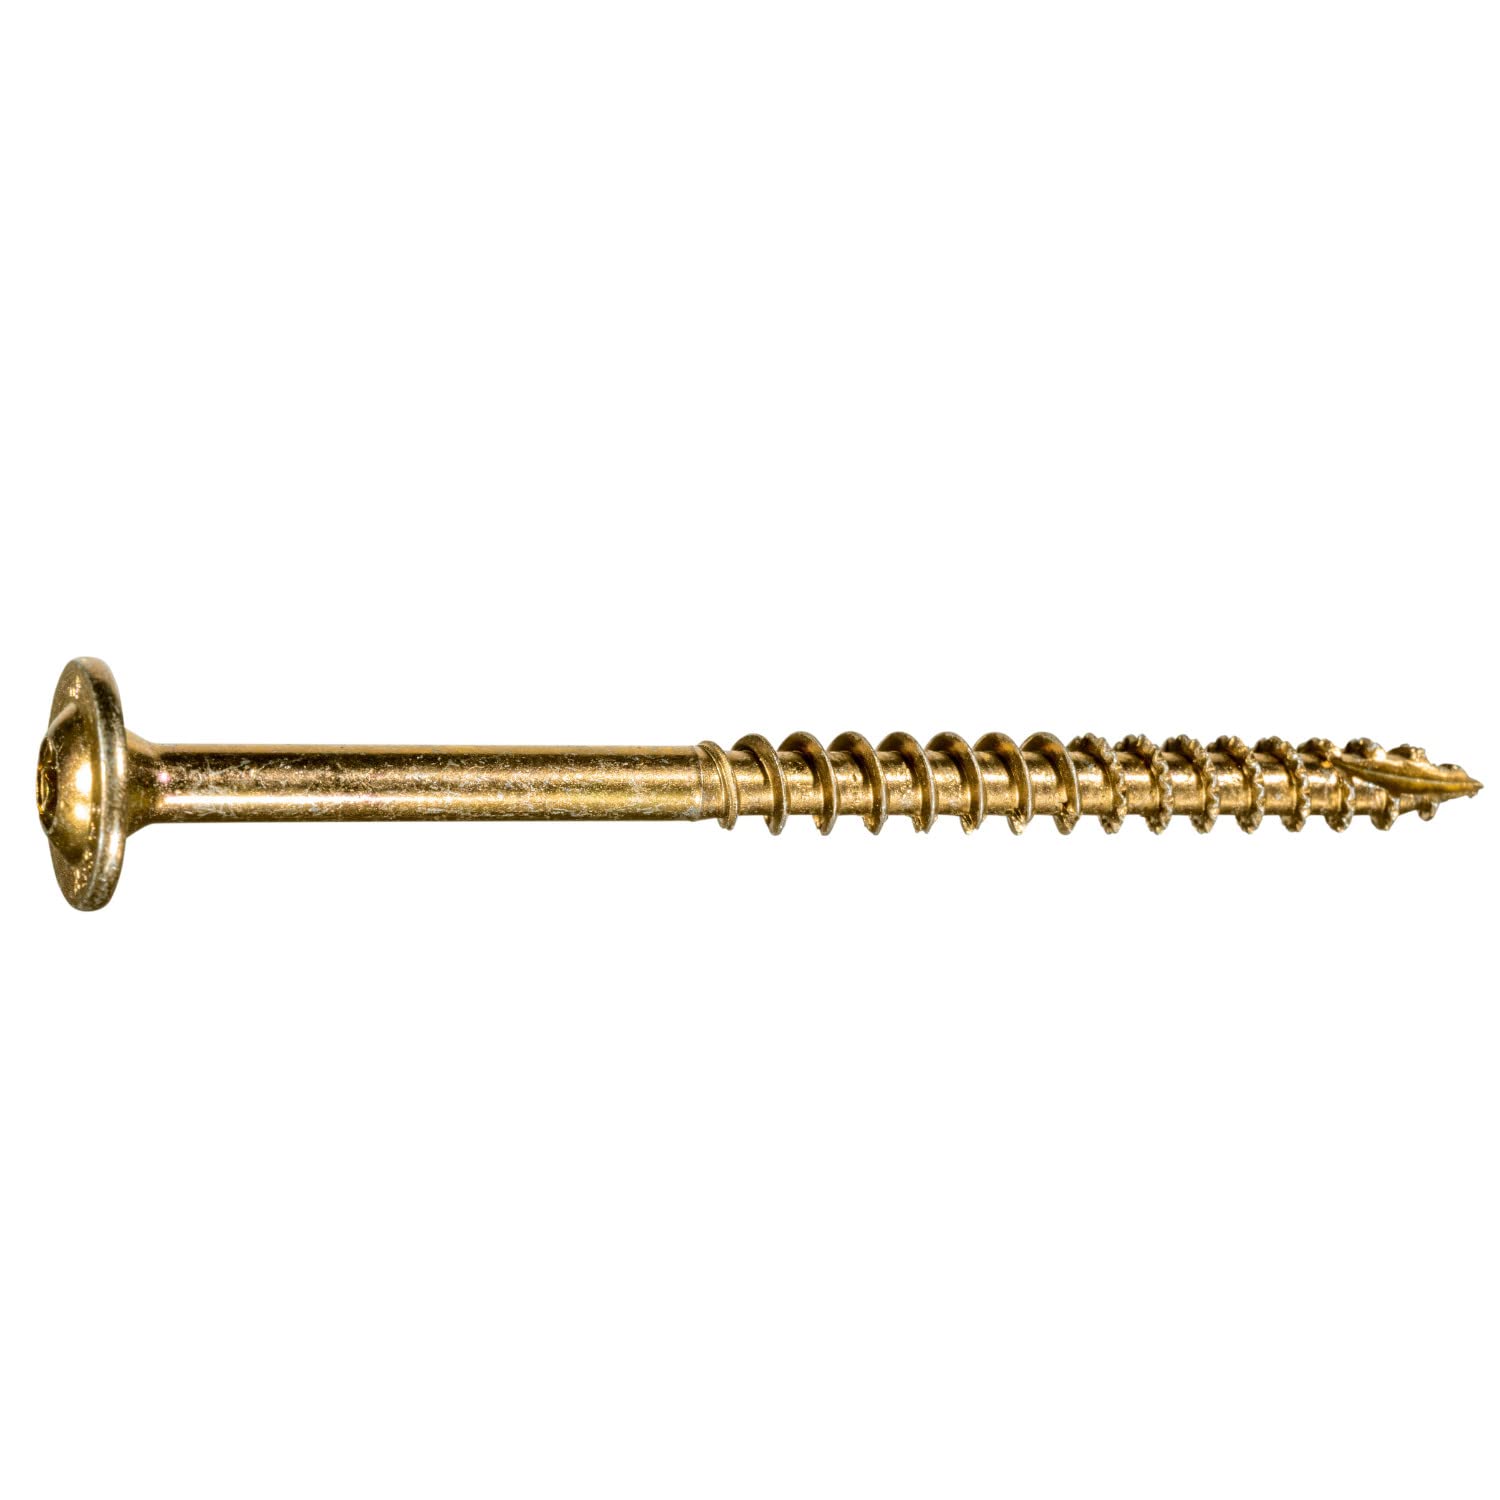 Generic 5/16" x 4" Saberdrive Star Drive Interior Construction Lag Screws, Type 17 Point, Secure Fastening with Alloy Steel f